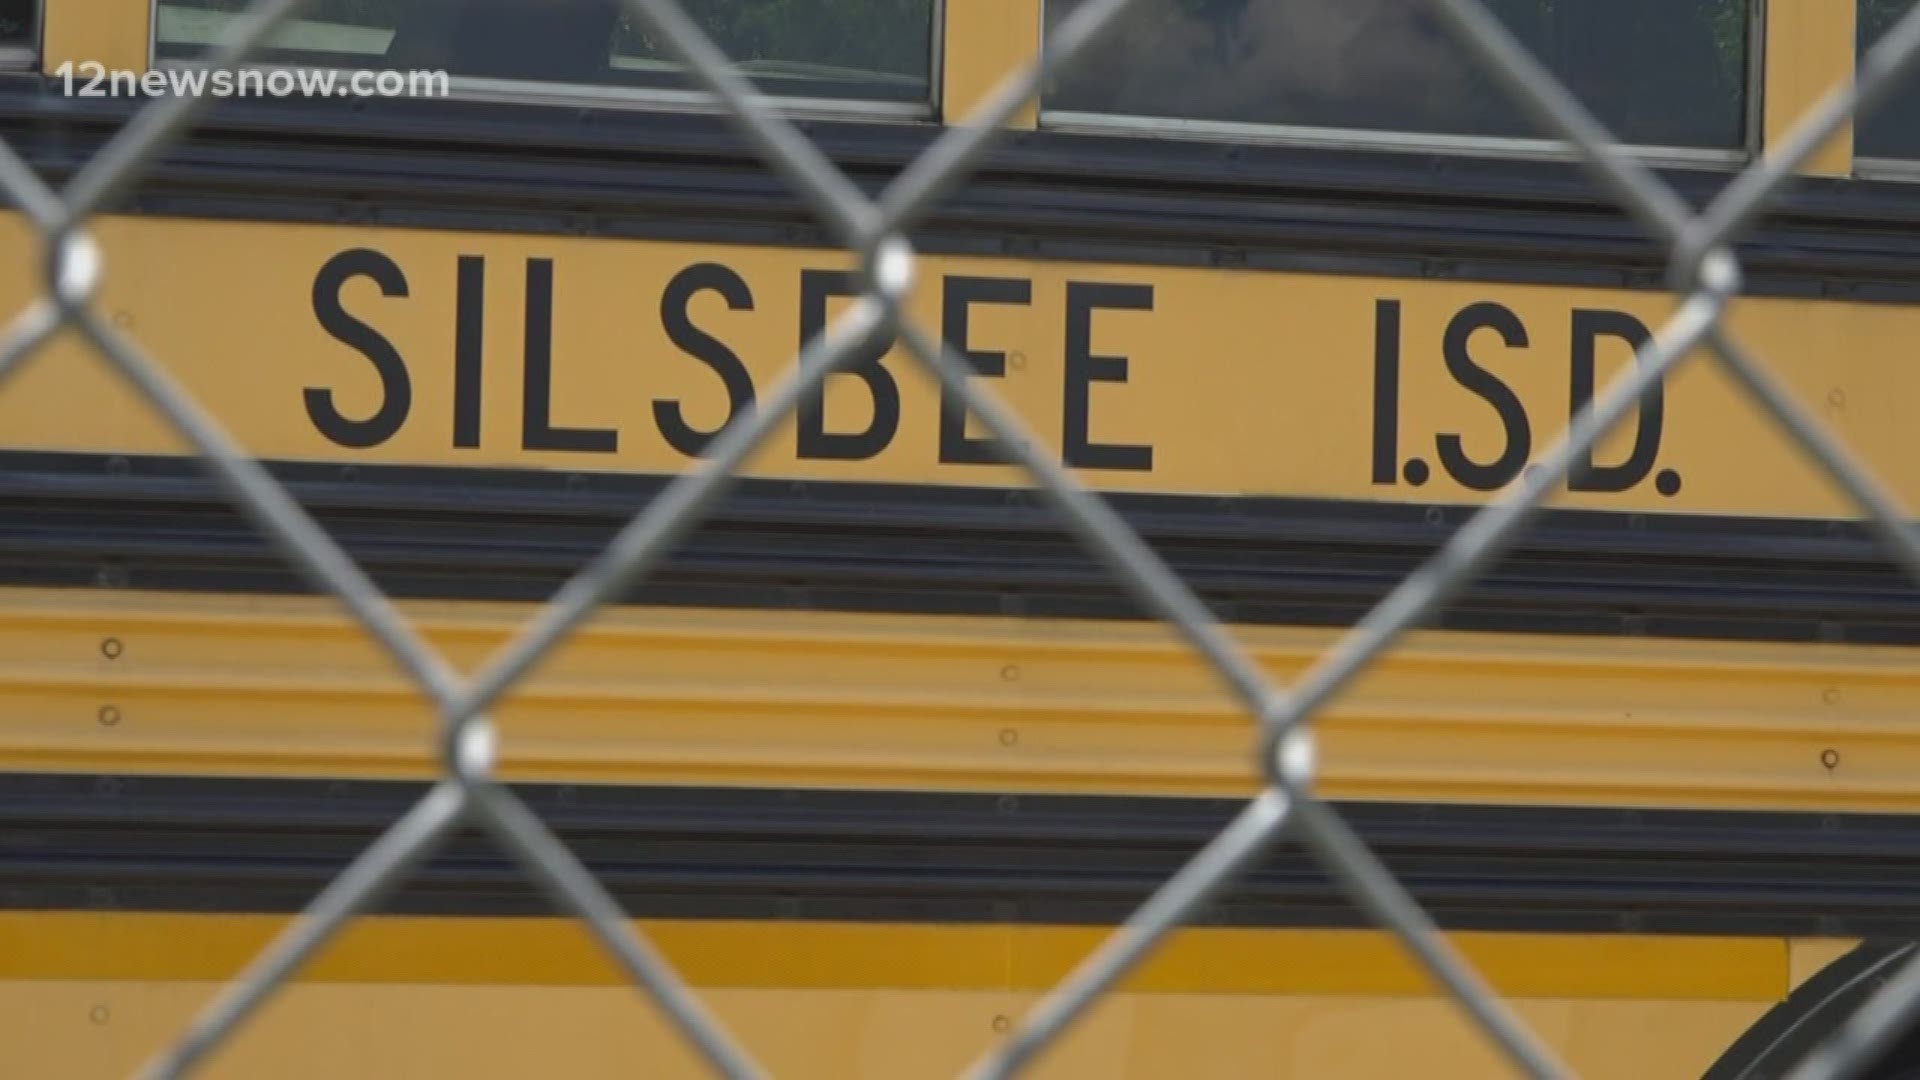 Sara Pedder says the bus driver was punishing kids for acting rowdy on the ride home.